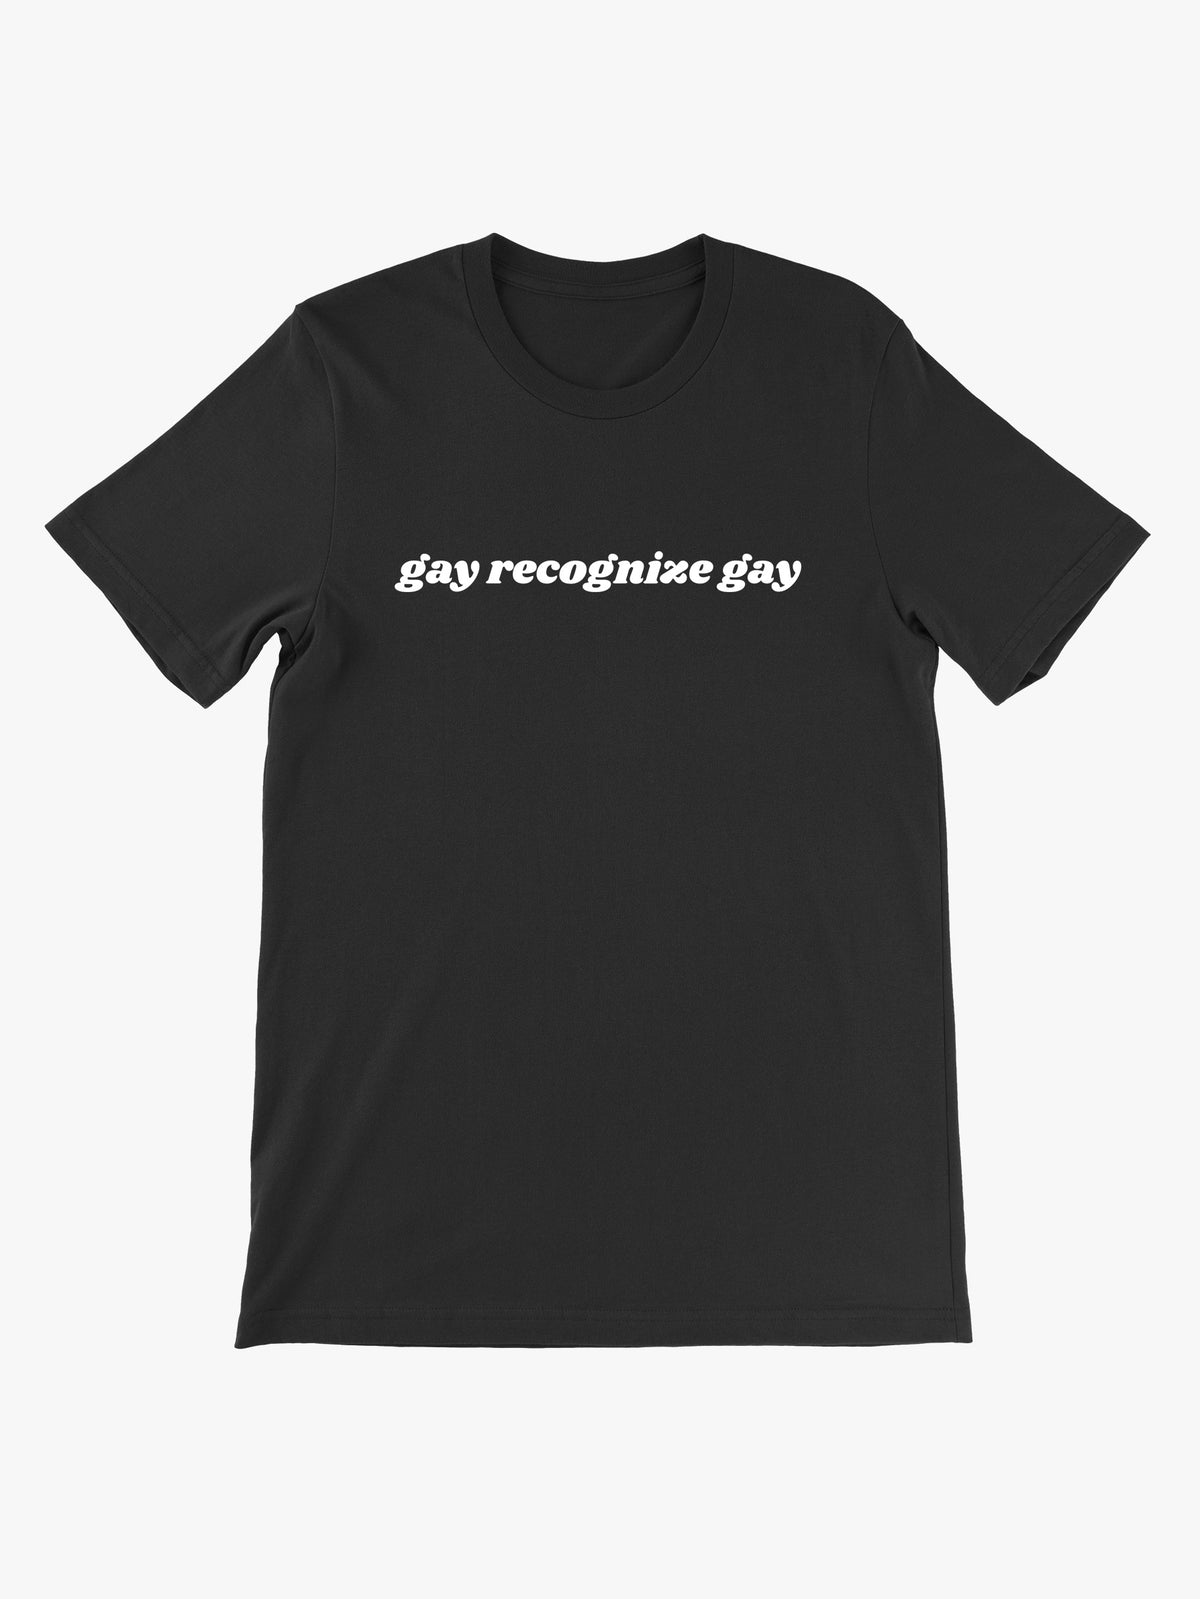 gay recognize gay by Dirty Laundry